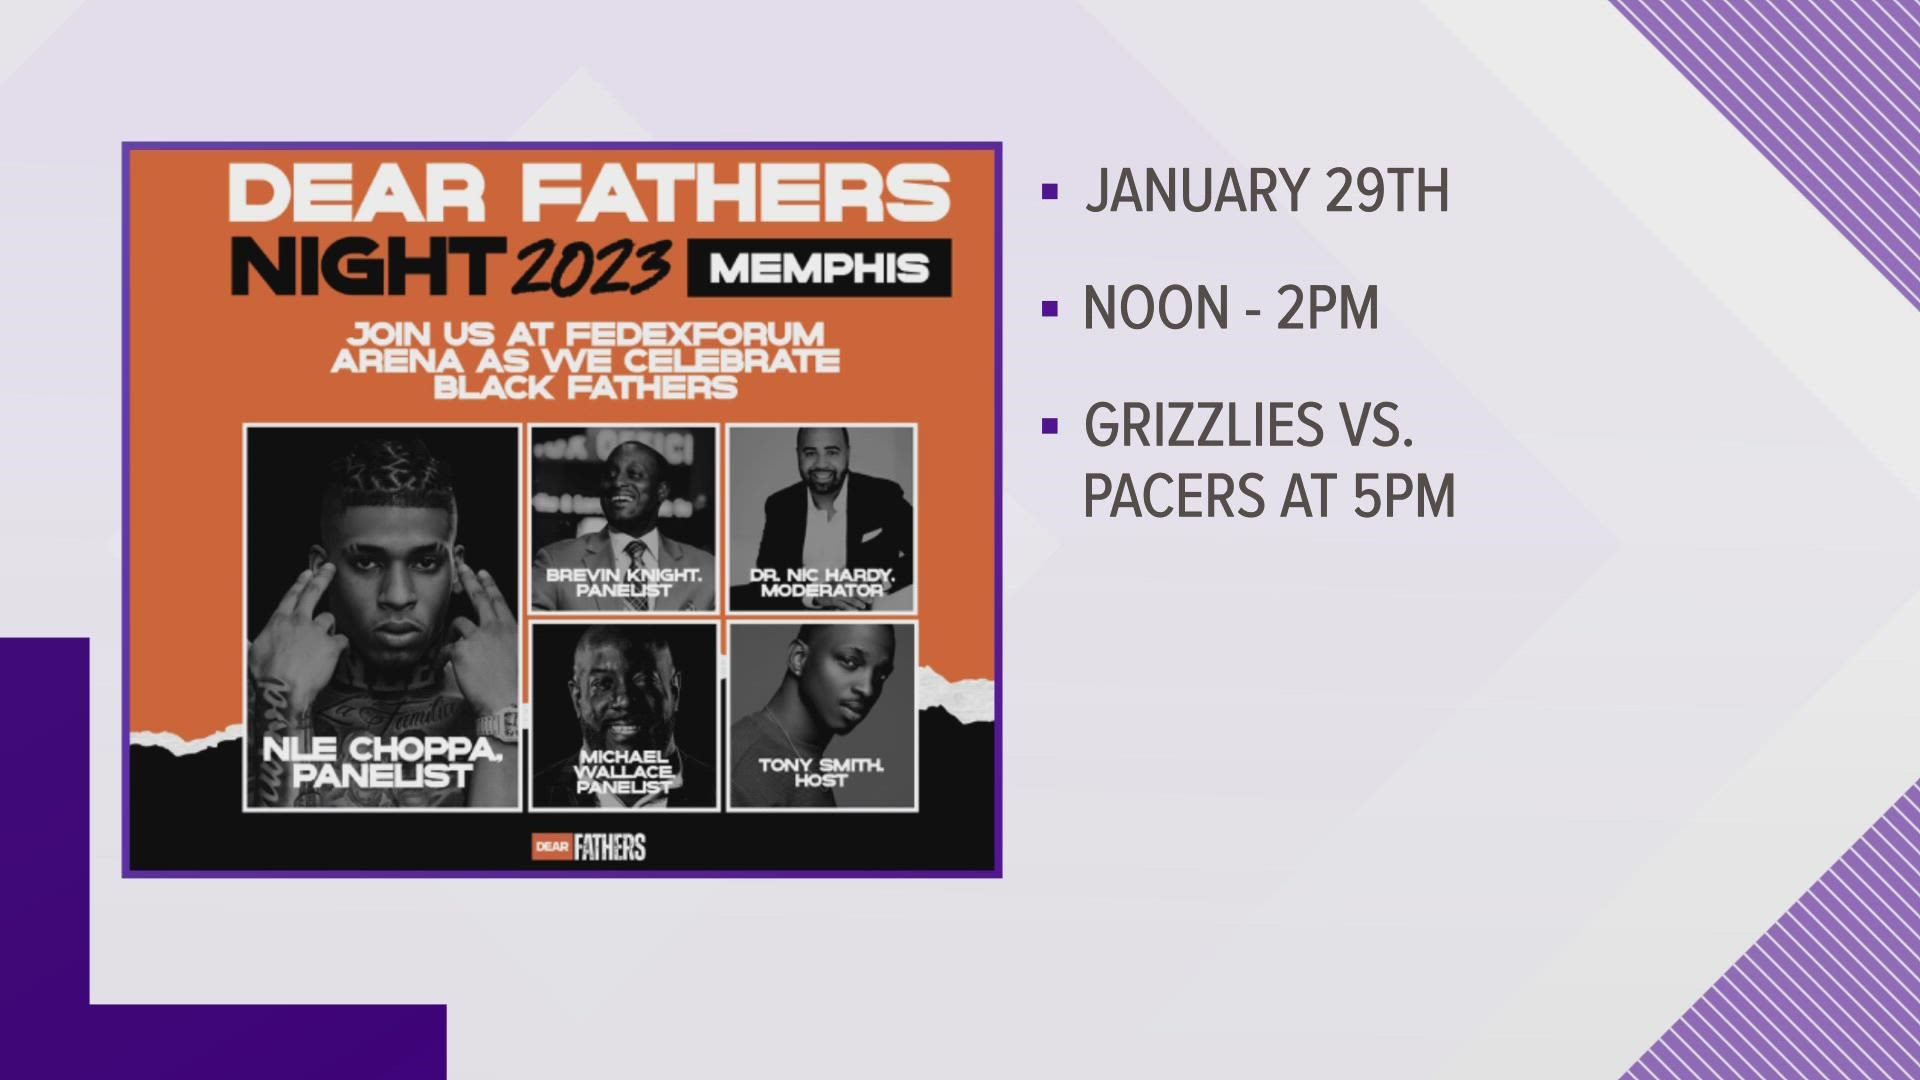 The event will take place on Jan. 29 before the Grizzlies' game from noon until 2 p.m.